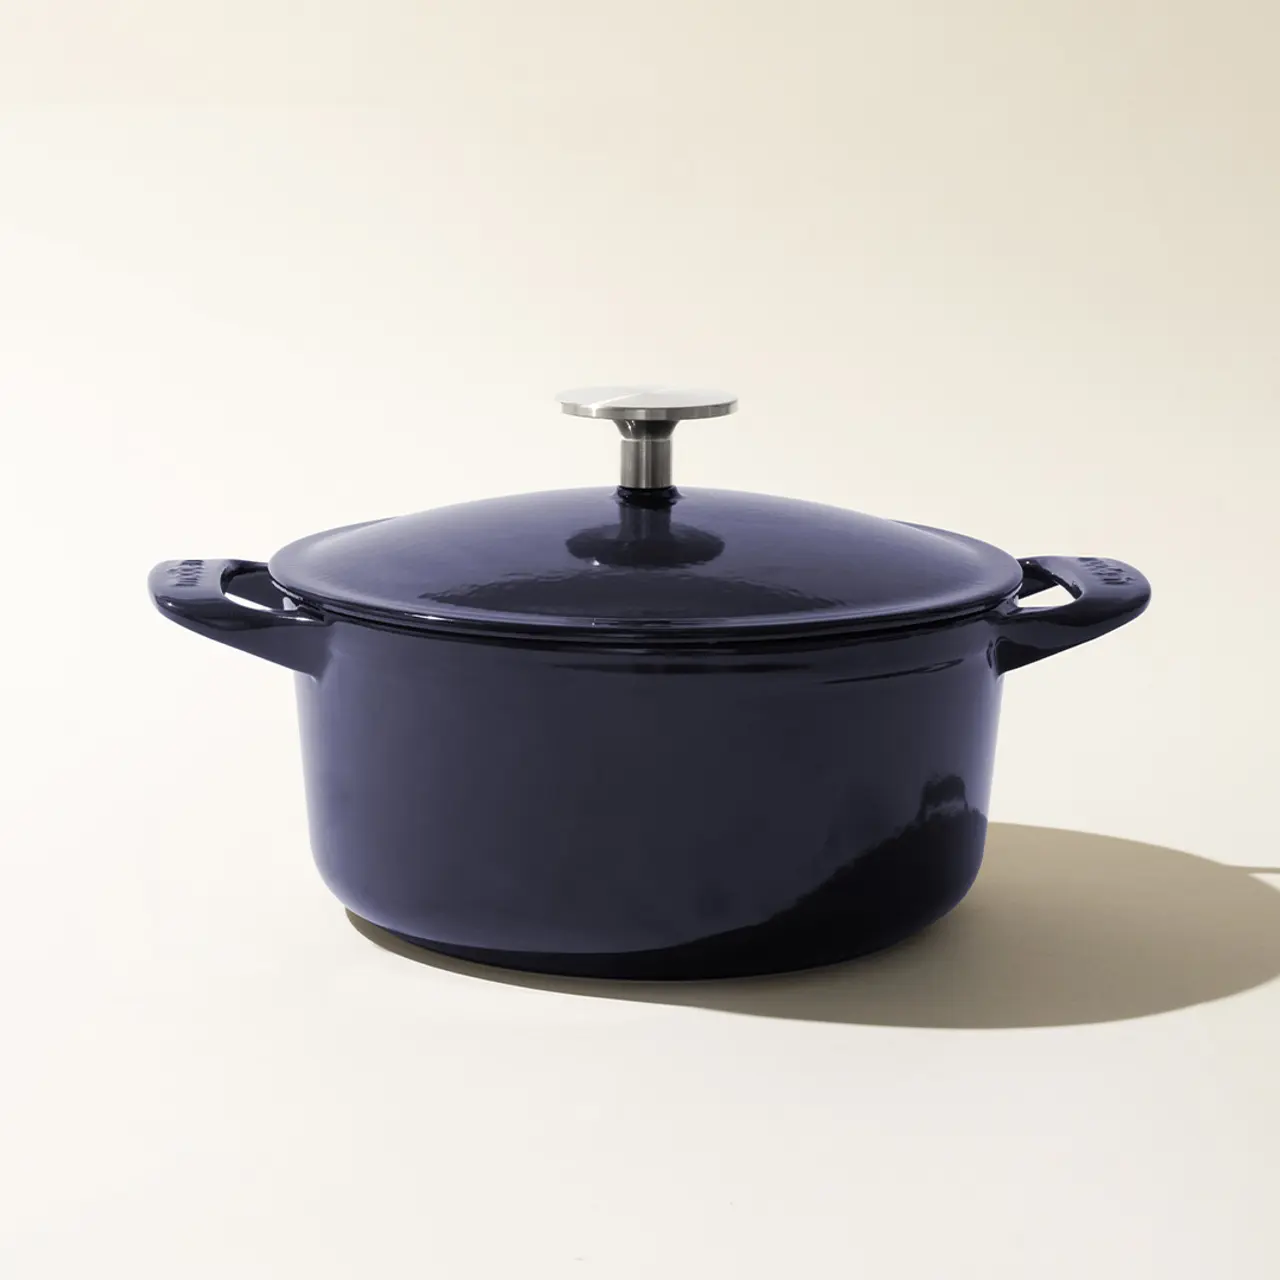 A navy blue enameled cast iron Dutch oven with a lid, set against a beige background.